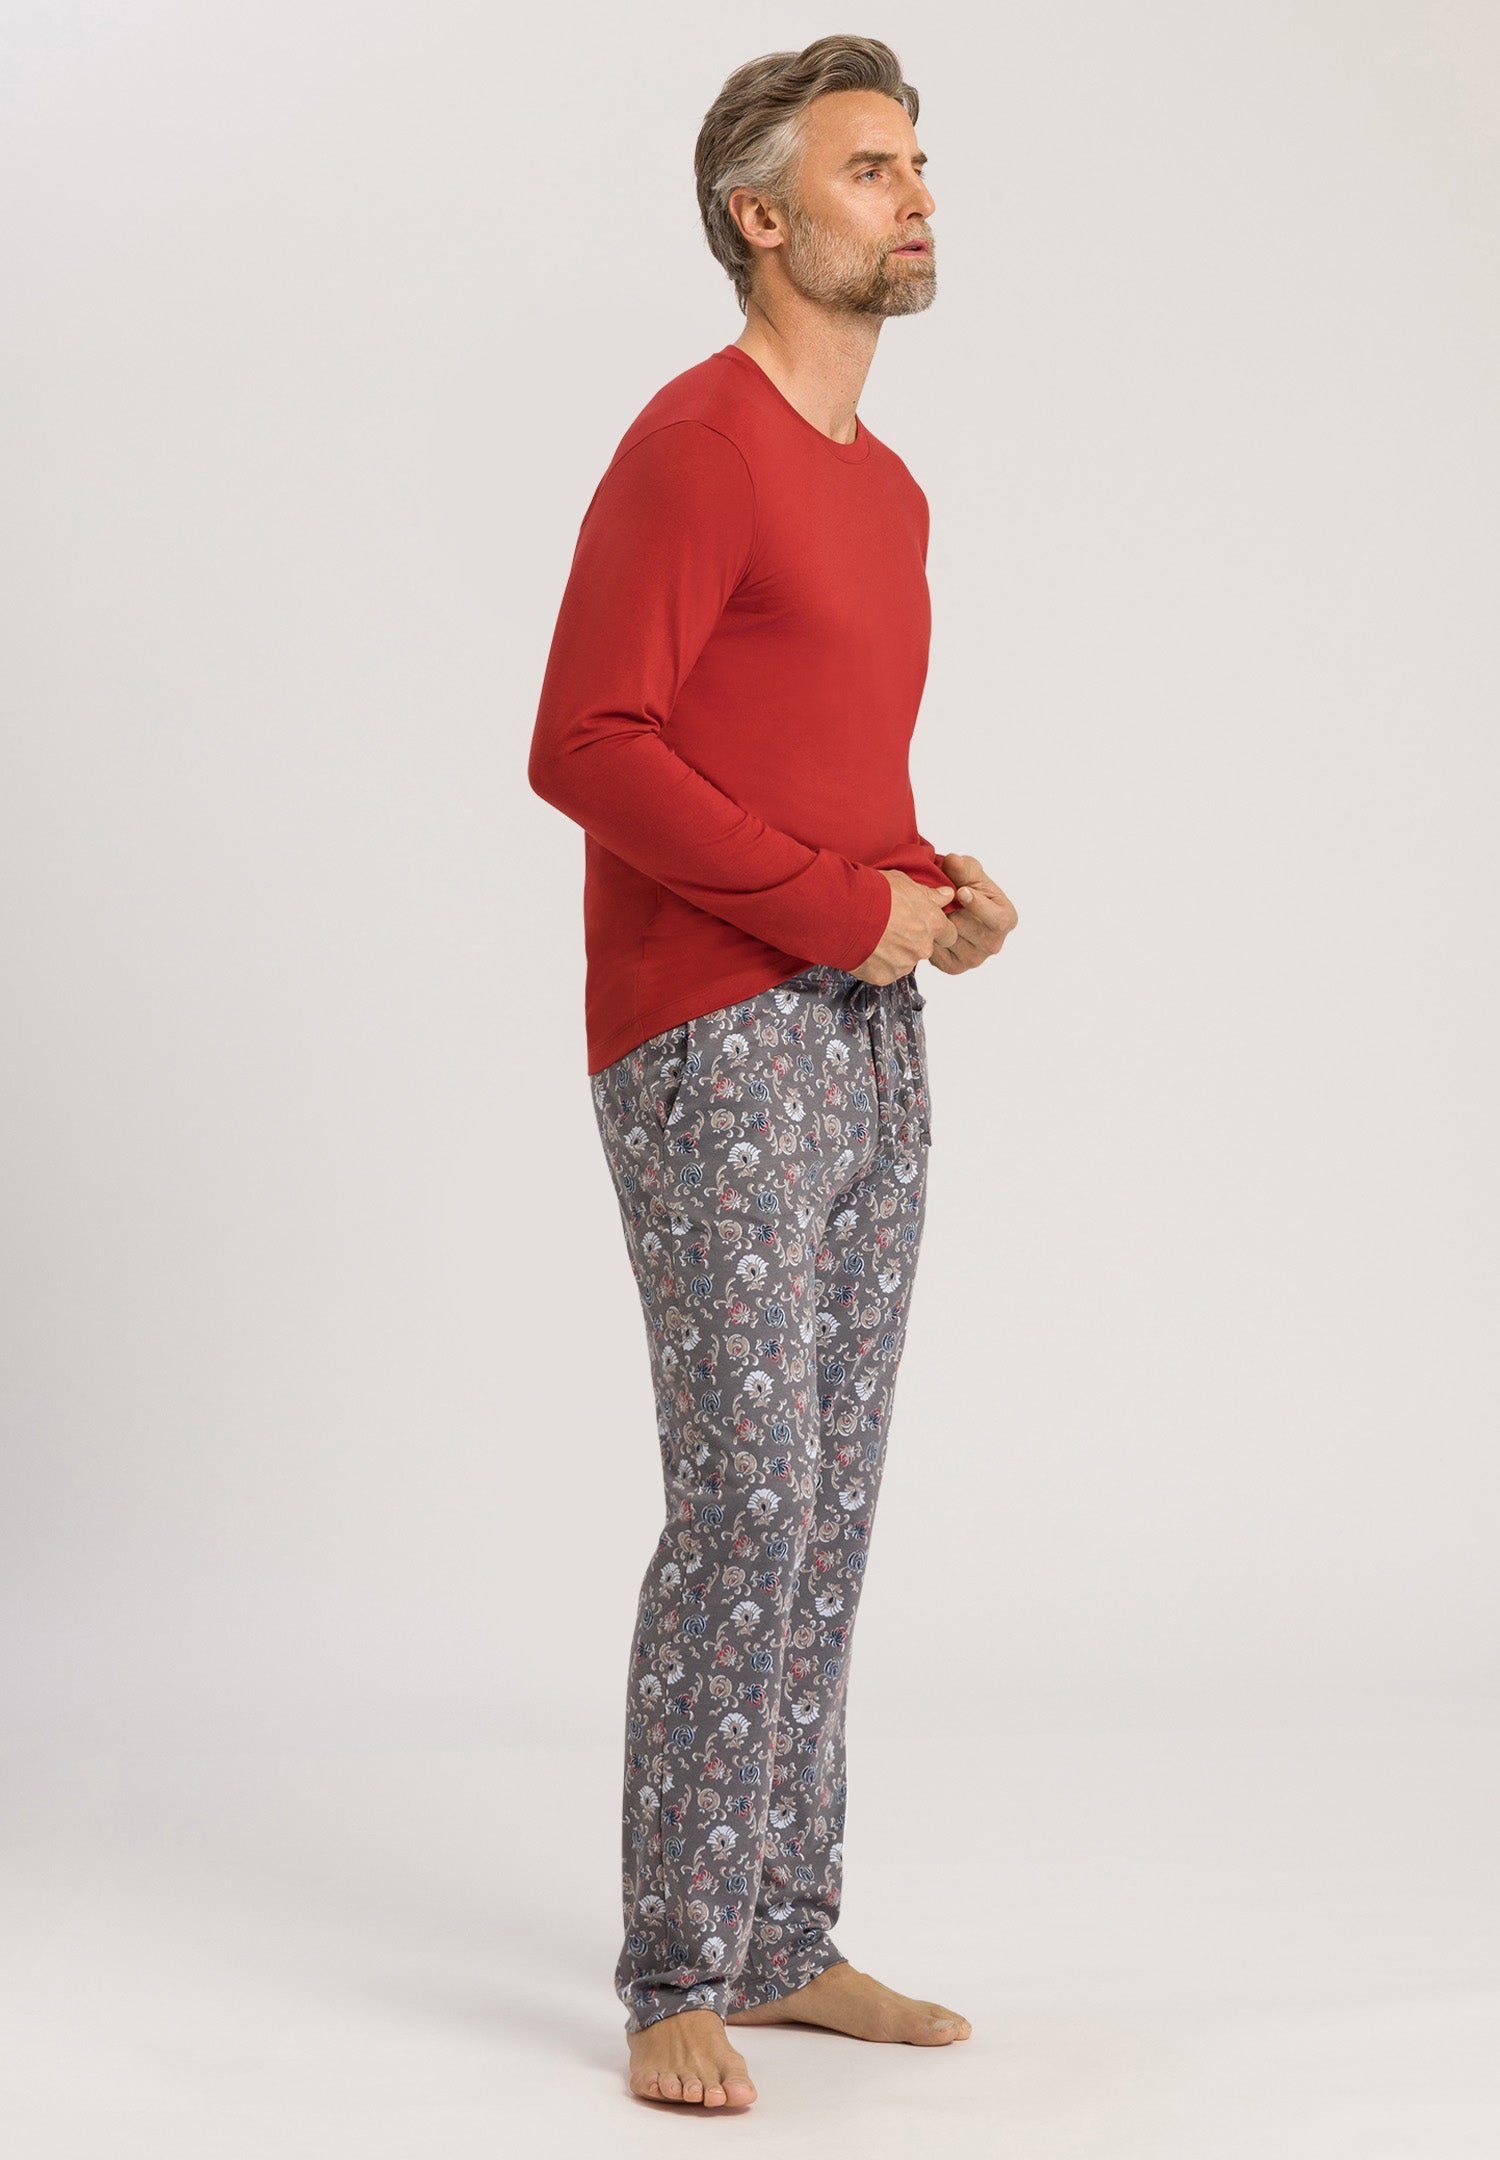 75216 Night And Day KNIT LOUNGE PANT - 2382 Pure Botany Print